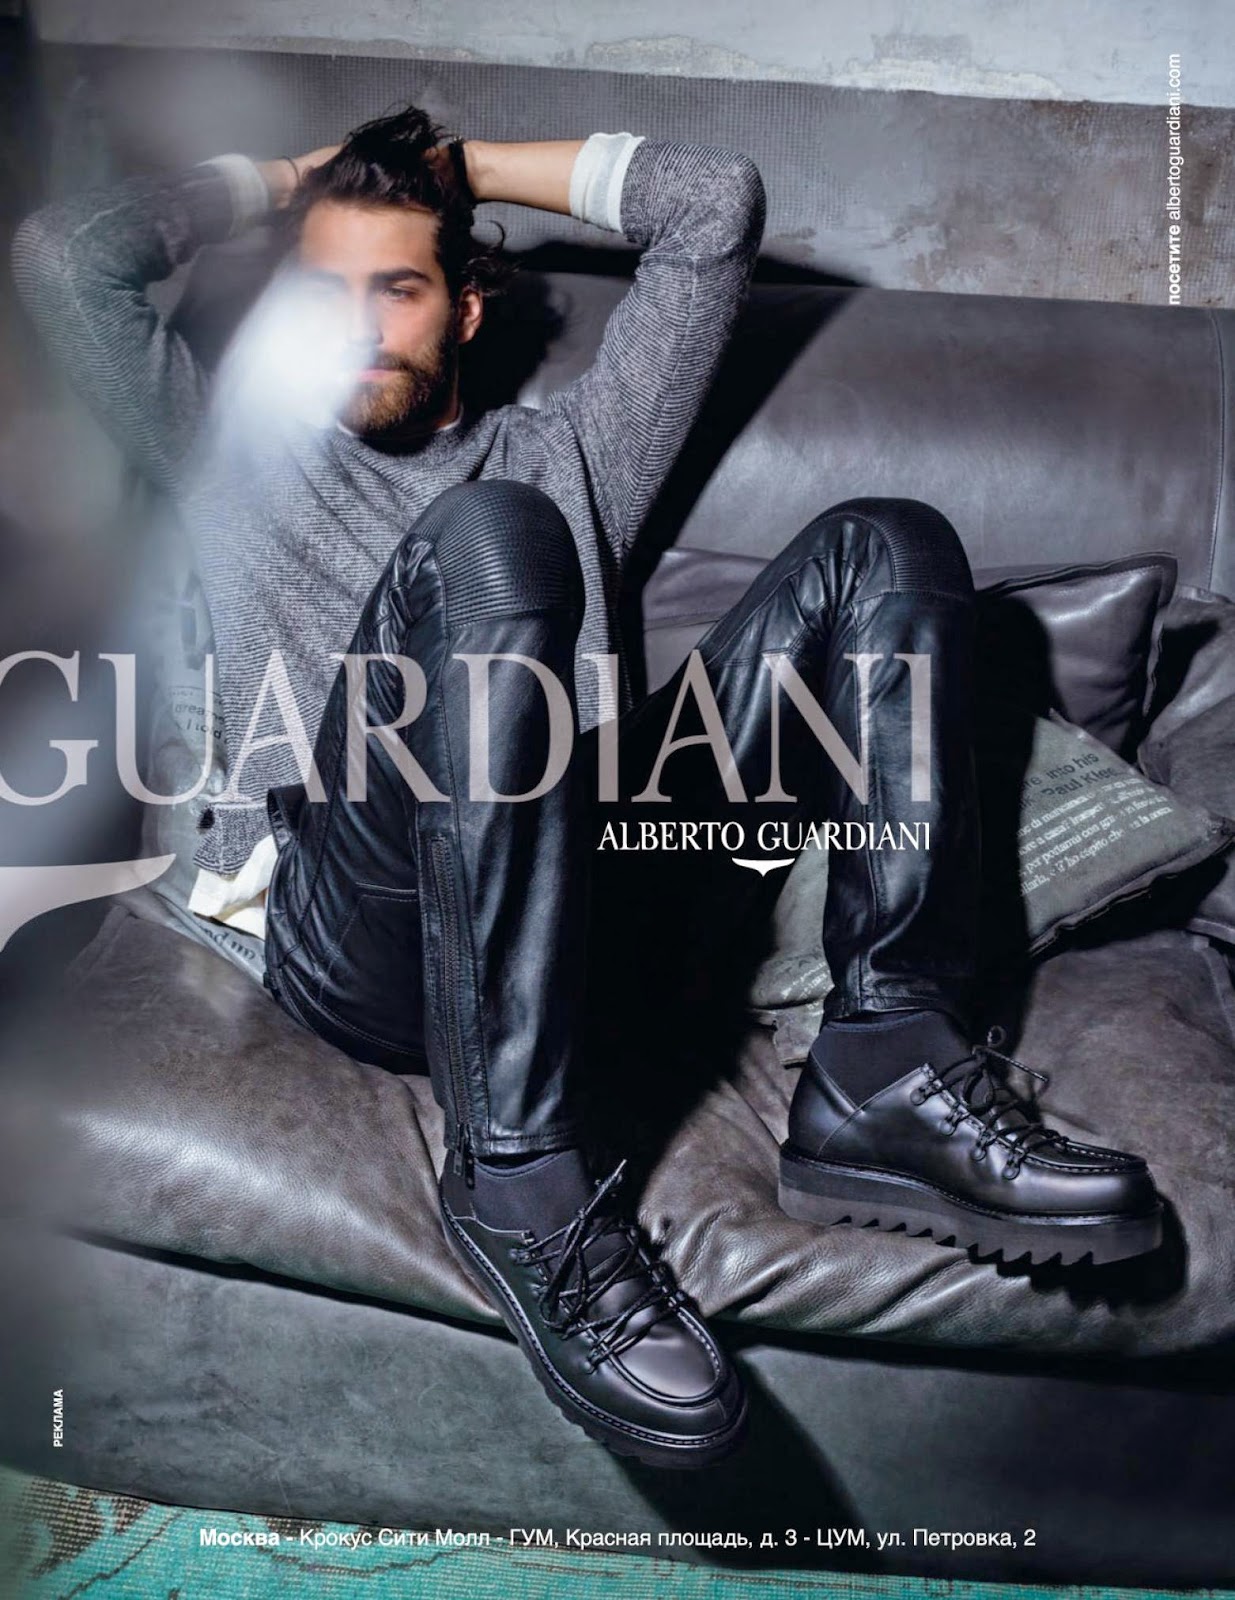 The Essentialist - Fashion Advertising Updated Daily: Alberto Guardiani ...